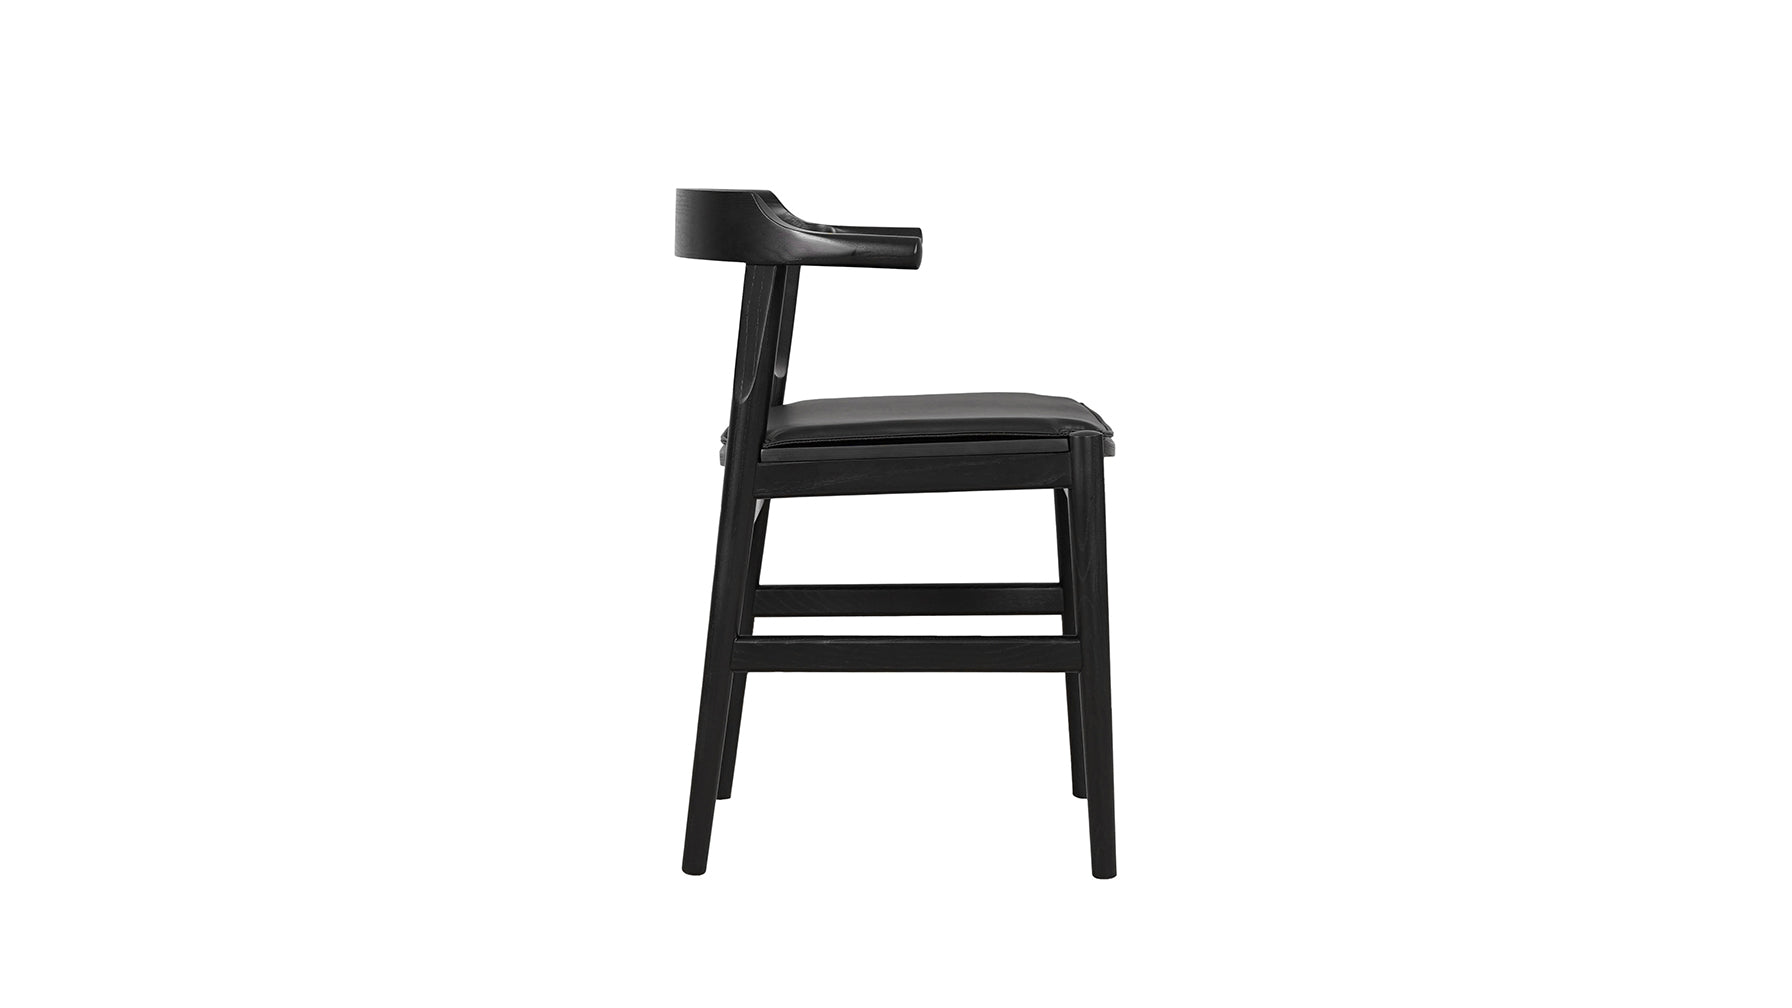 Tuck In Dining Chair with Cushion, Black Ash, Wood Seat with Black Cushion - Image 3